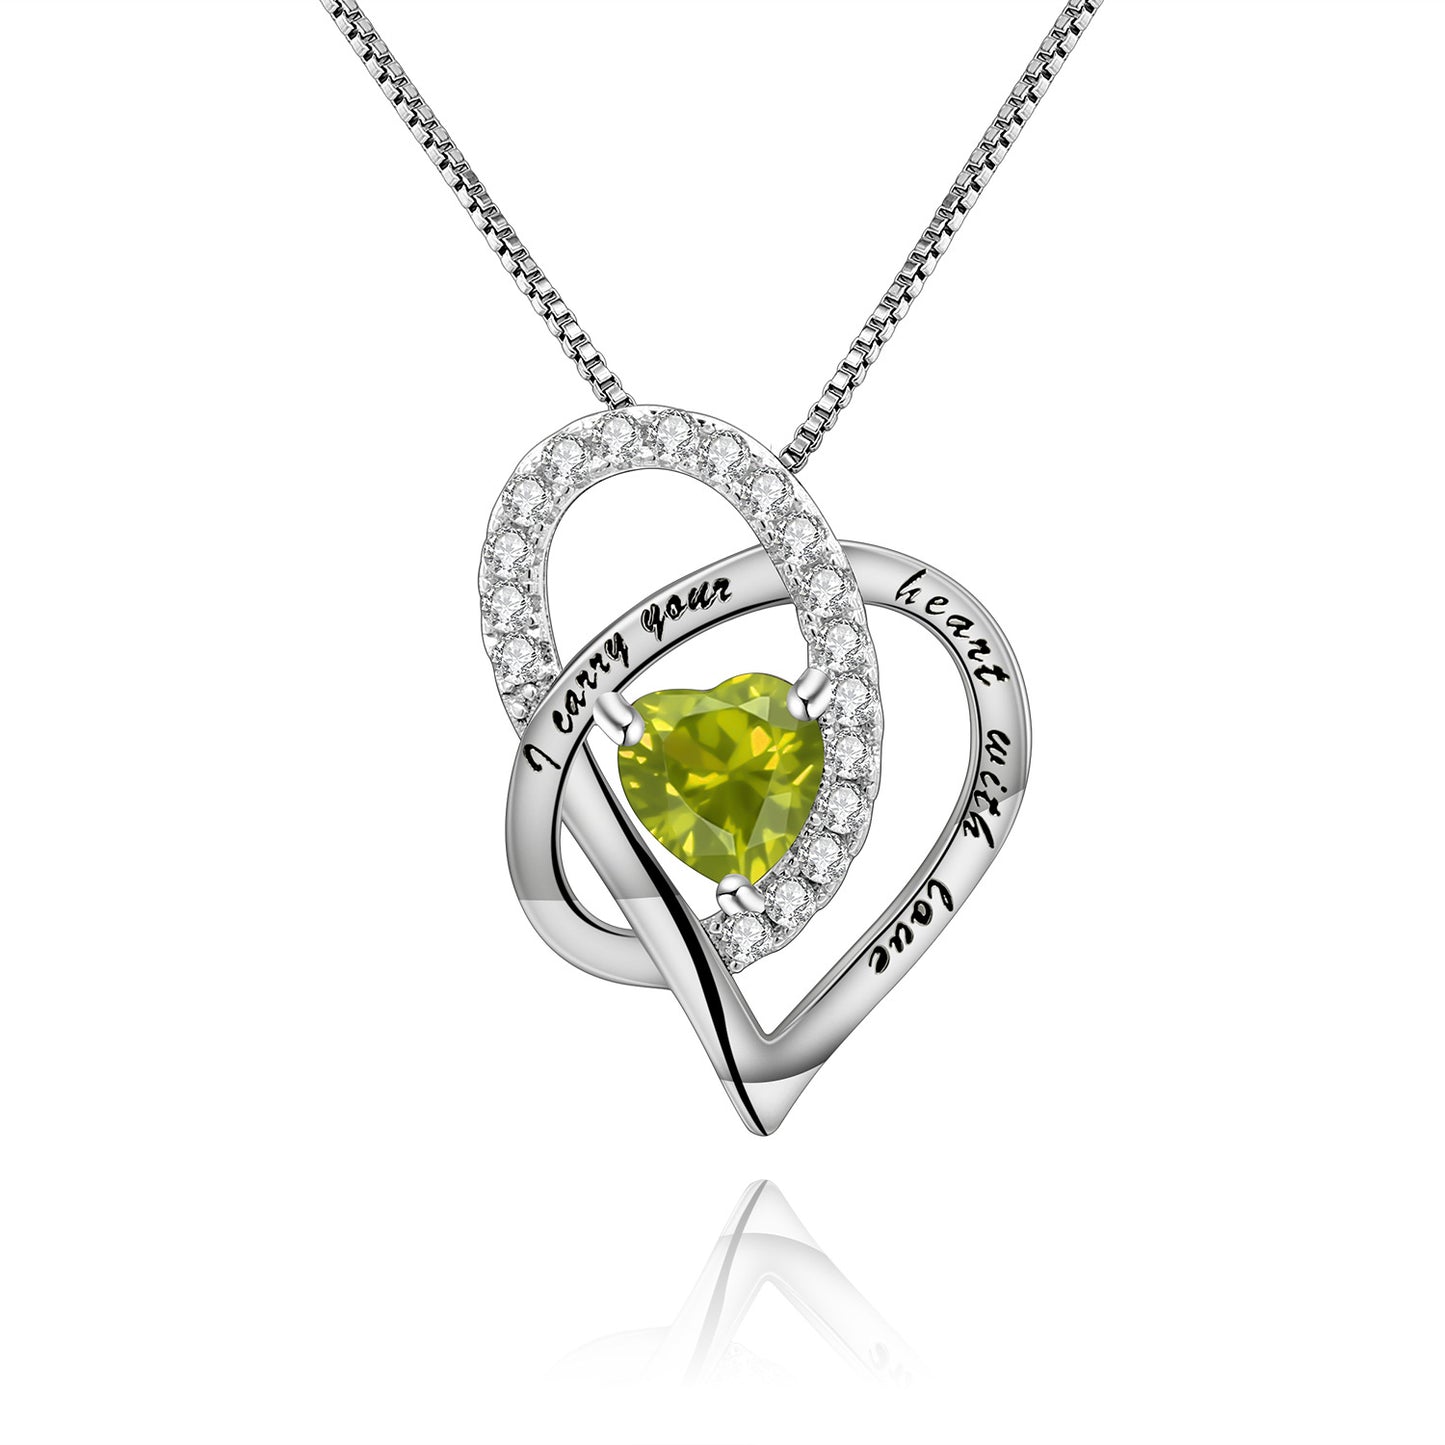 Luxury Style Interlocking Design Natural Colourful Gemstone Love Heart Pendant Silver Necklace for Women